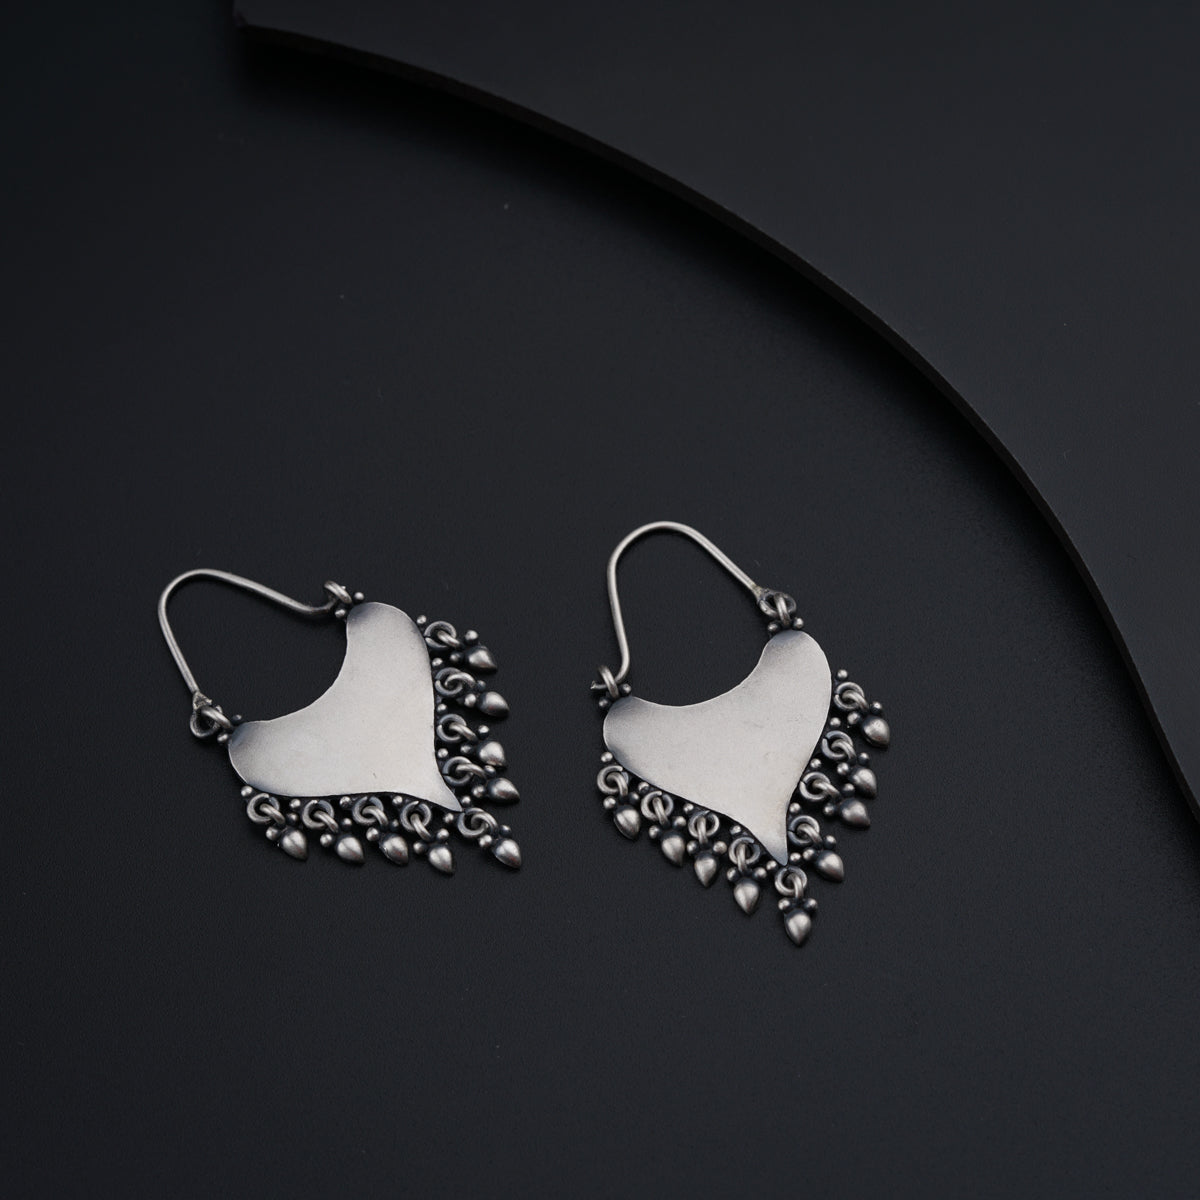 a pair of white and silver earrings on a black surface